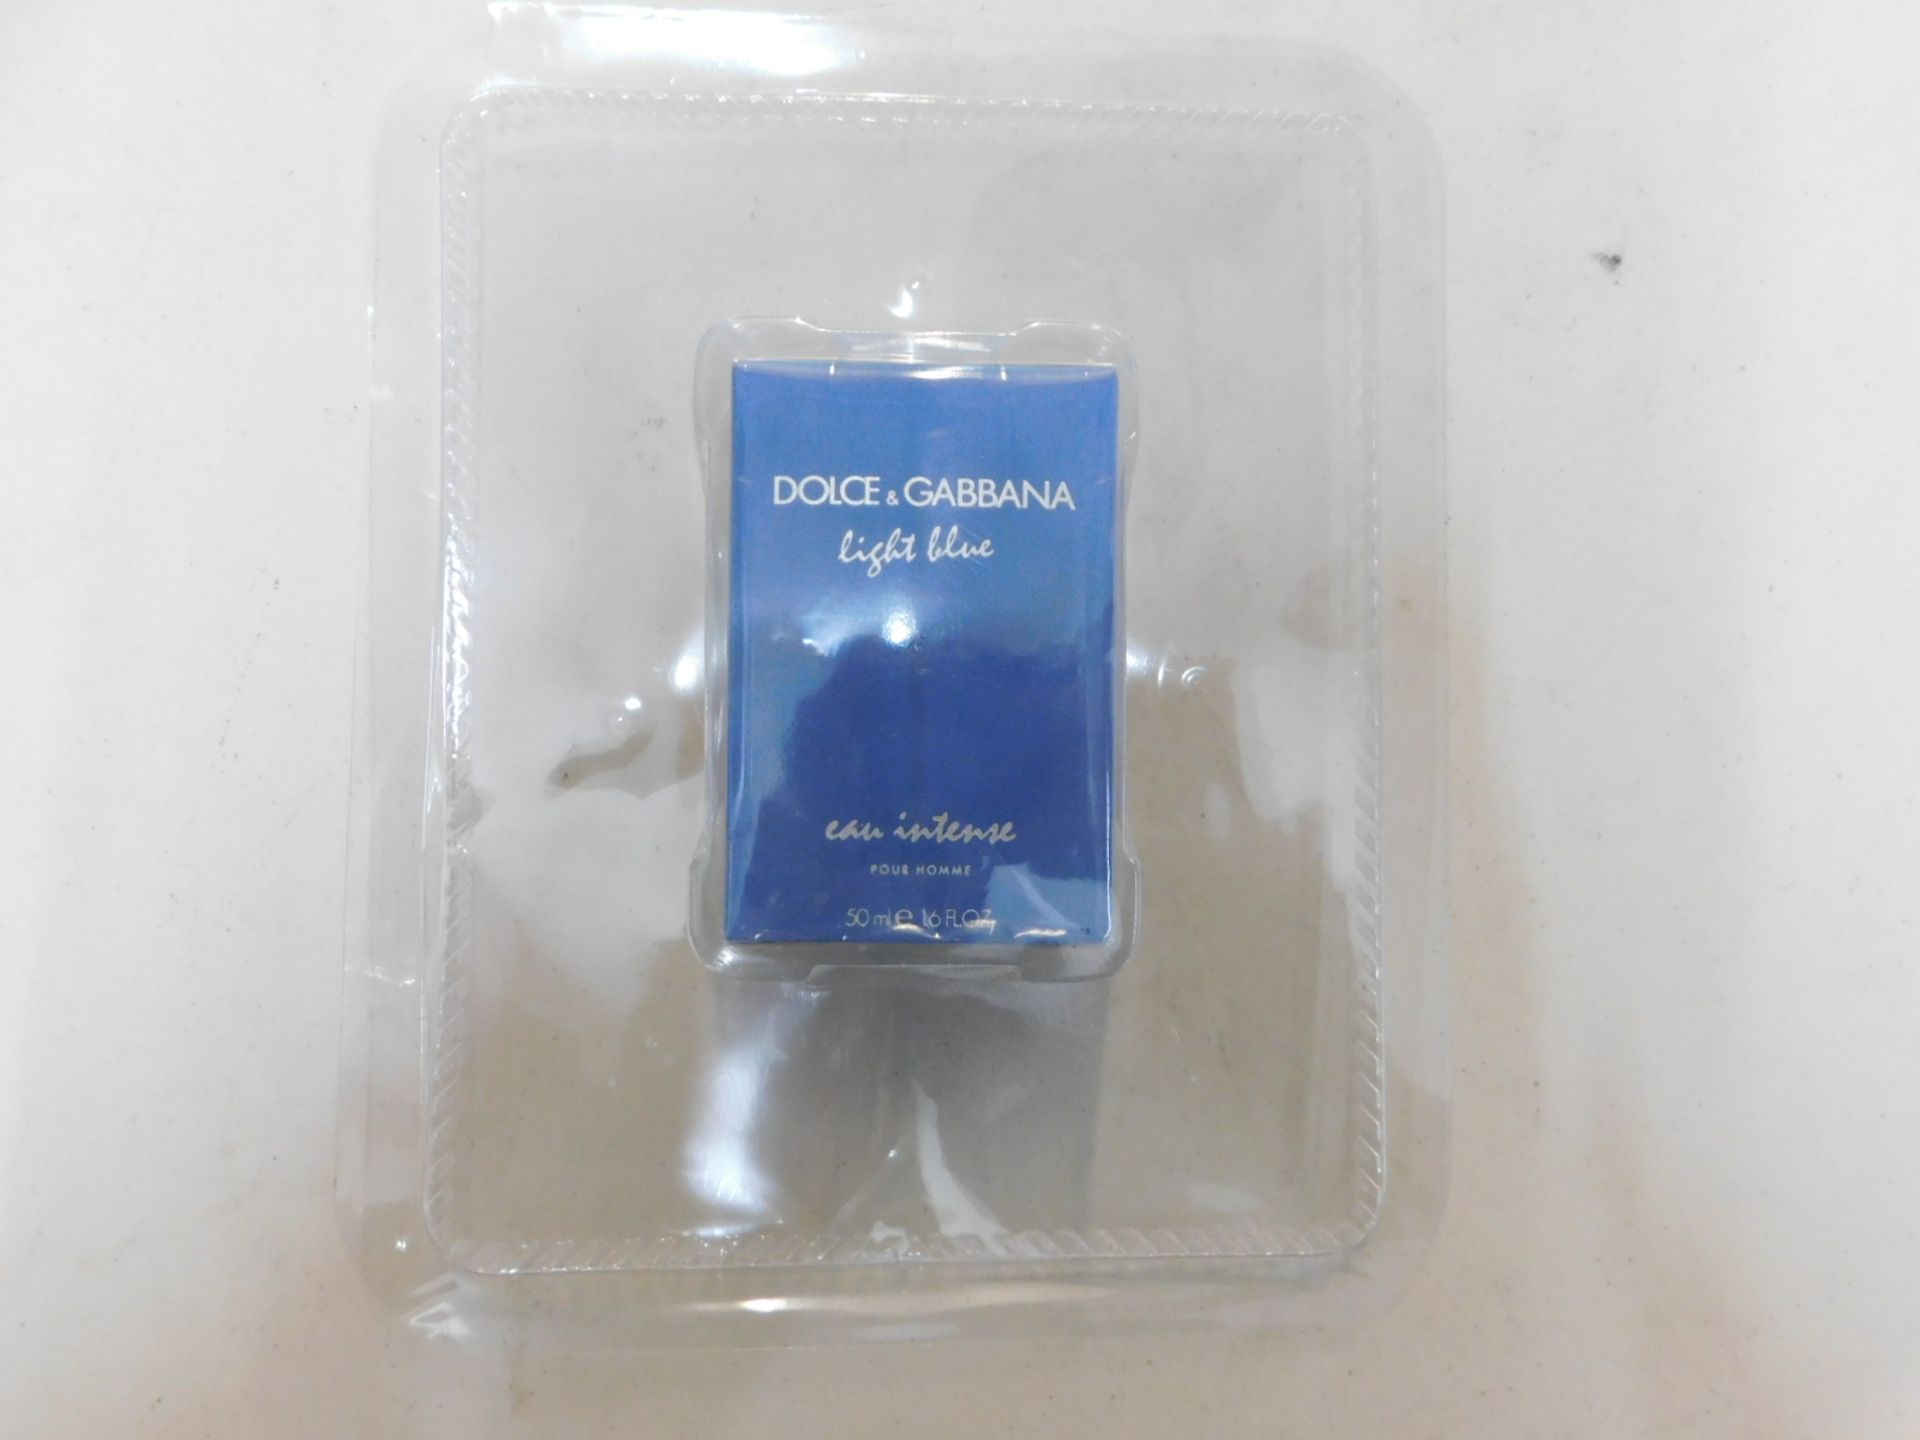 1 BRAND NEW SEALED PACK OF DOLCE & GABBANA LIGHT BLUE INTENSE AFTERSHAVE FOR MEN 50ML RRP £64.99